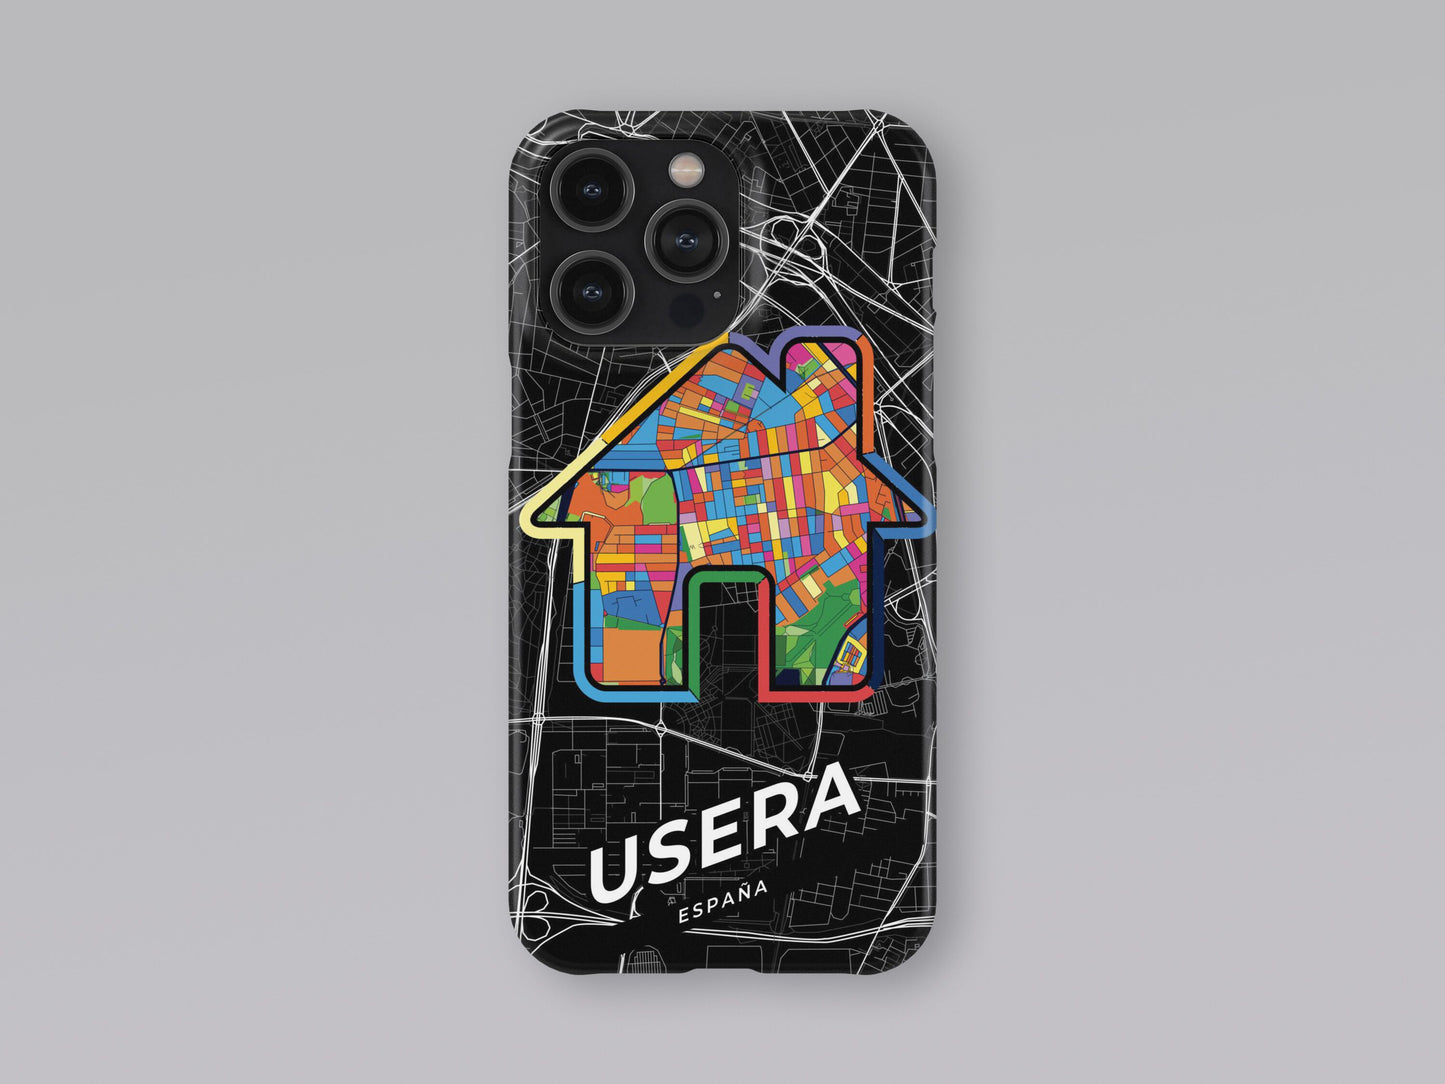 Usera Spain slim phone case with colorful icon 3